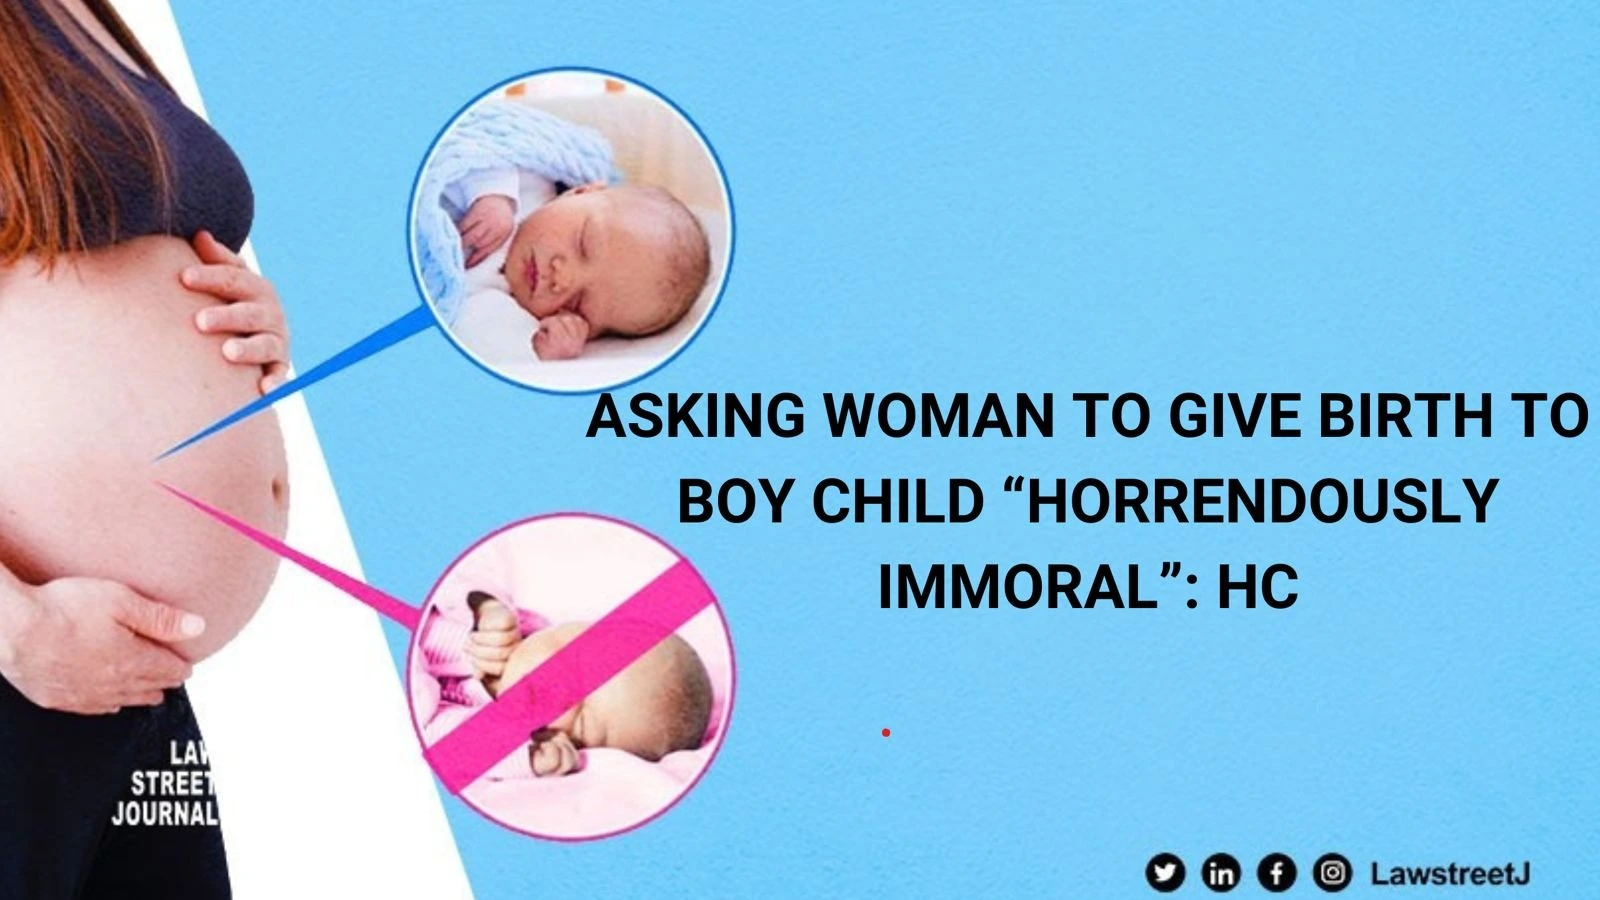 Asking woman to give birth only to boy child horrendously demoralising and immoral: Kerala HC